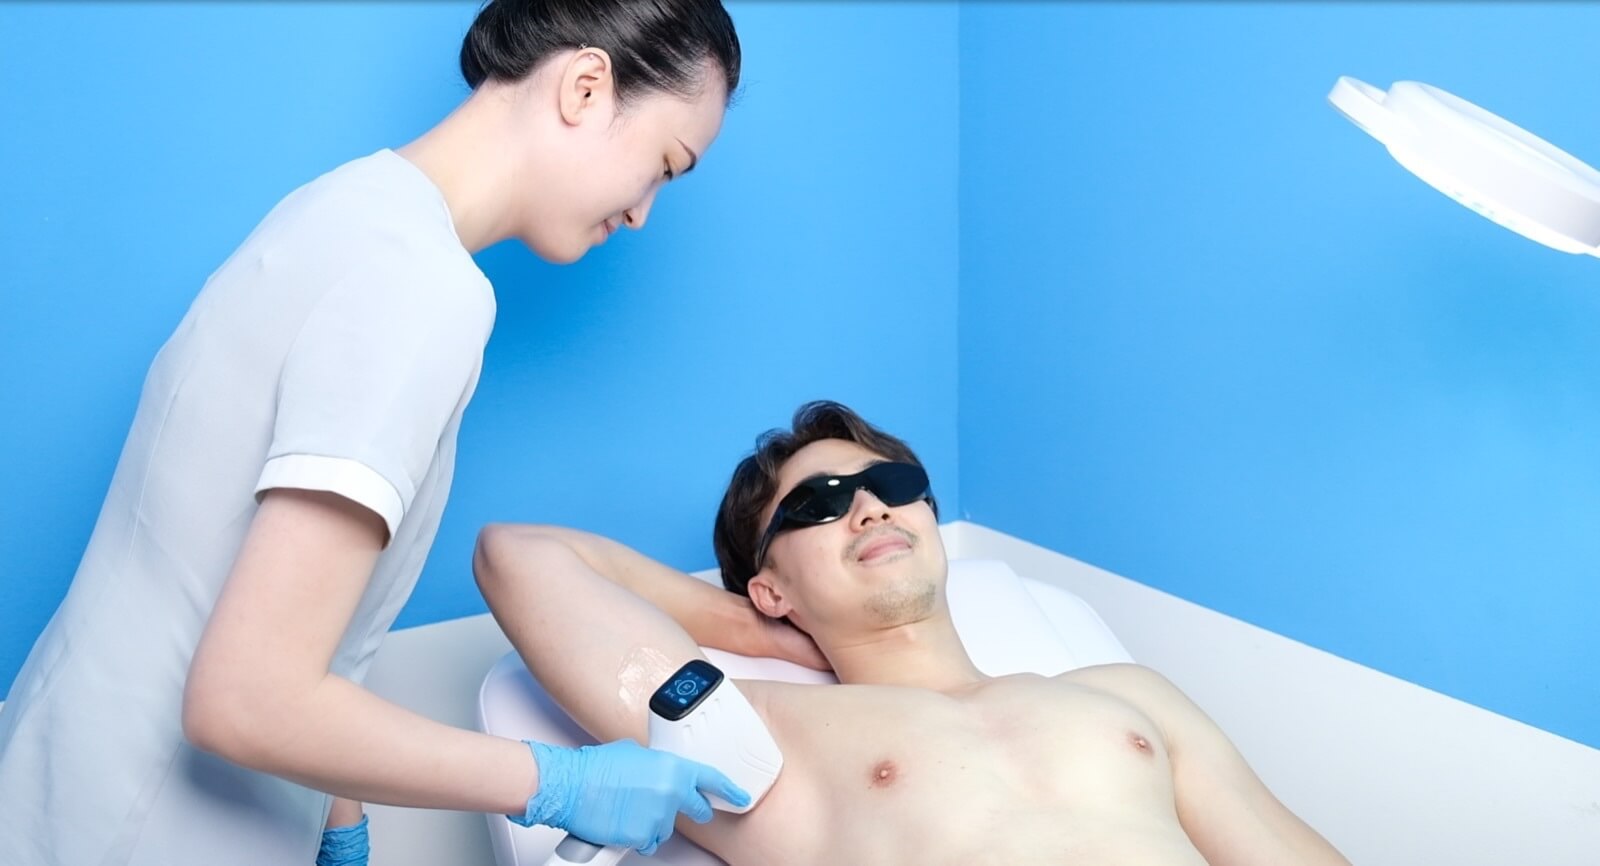 Profitable Korean Express Hair Removal Franchise Opportunities. Low Cost Set Up.